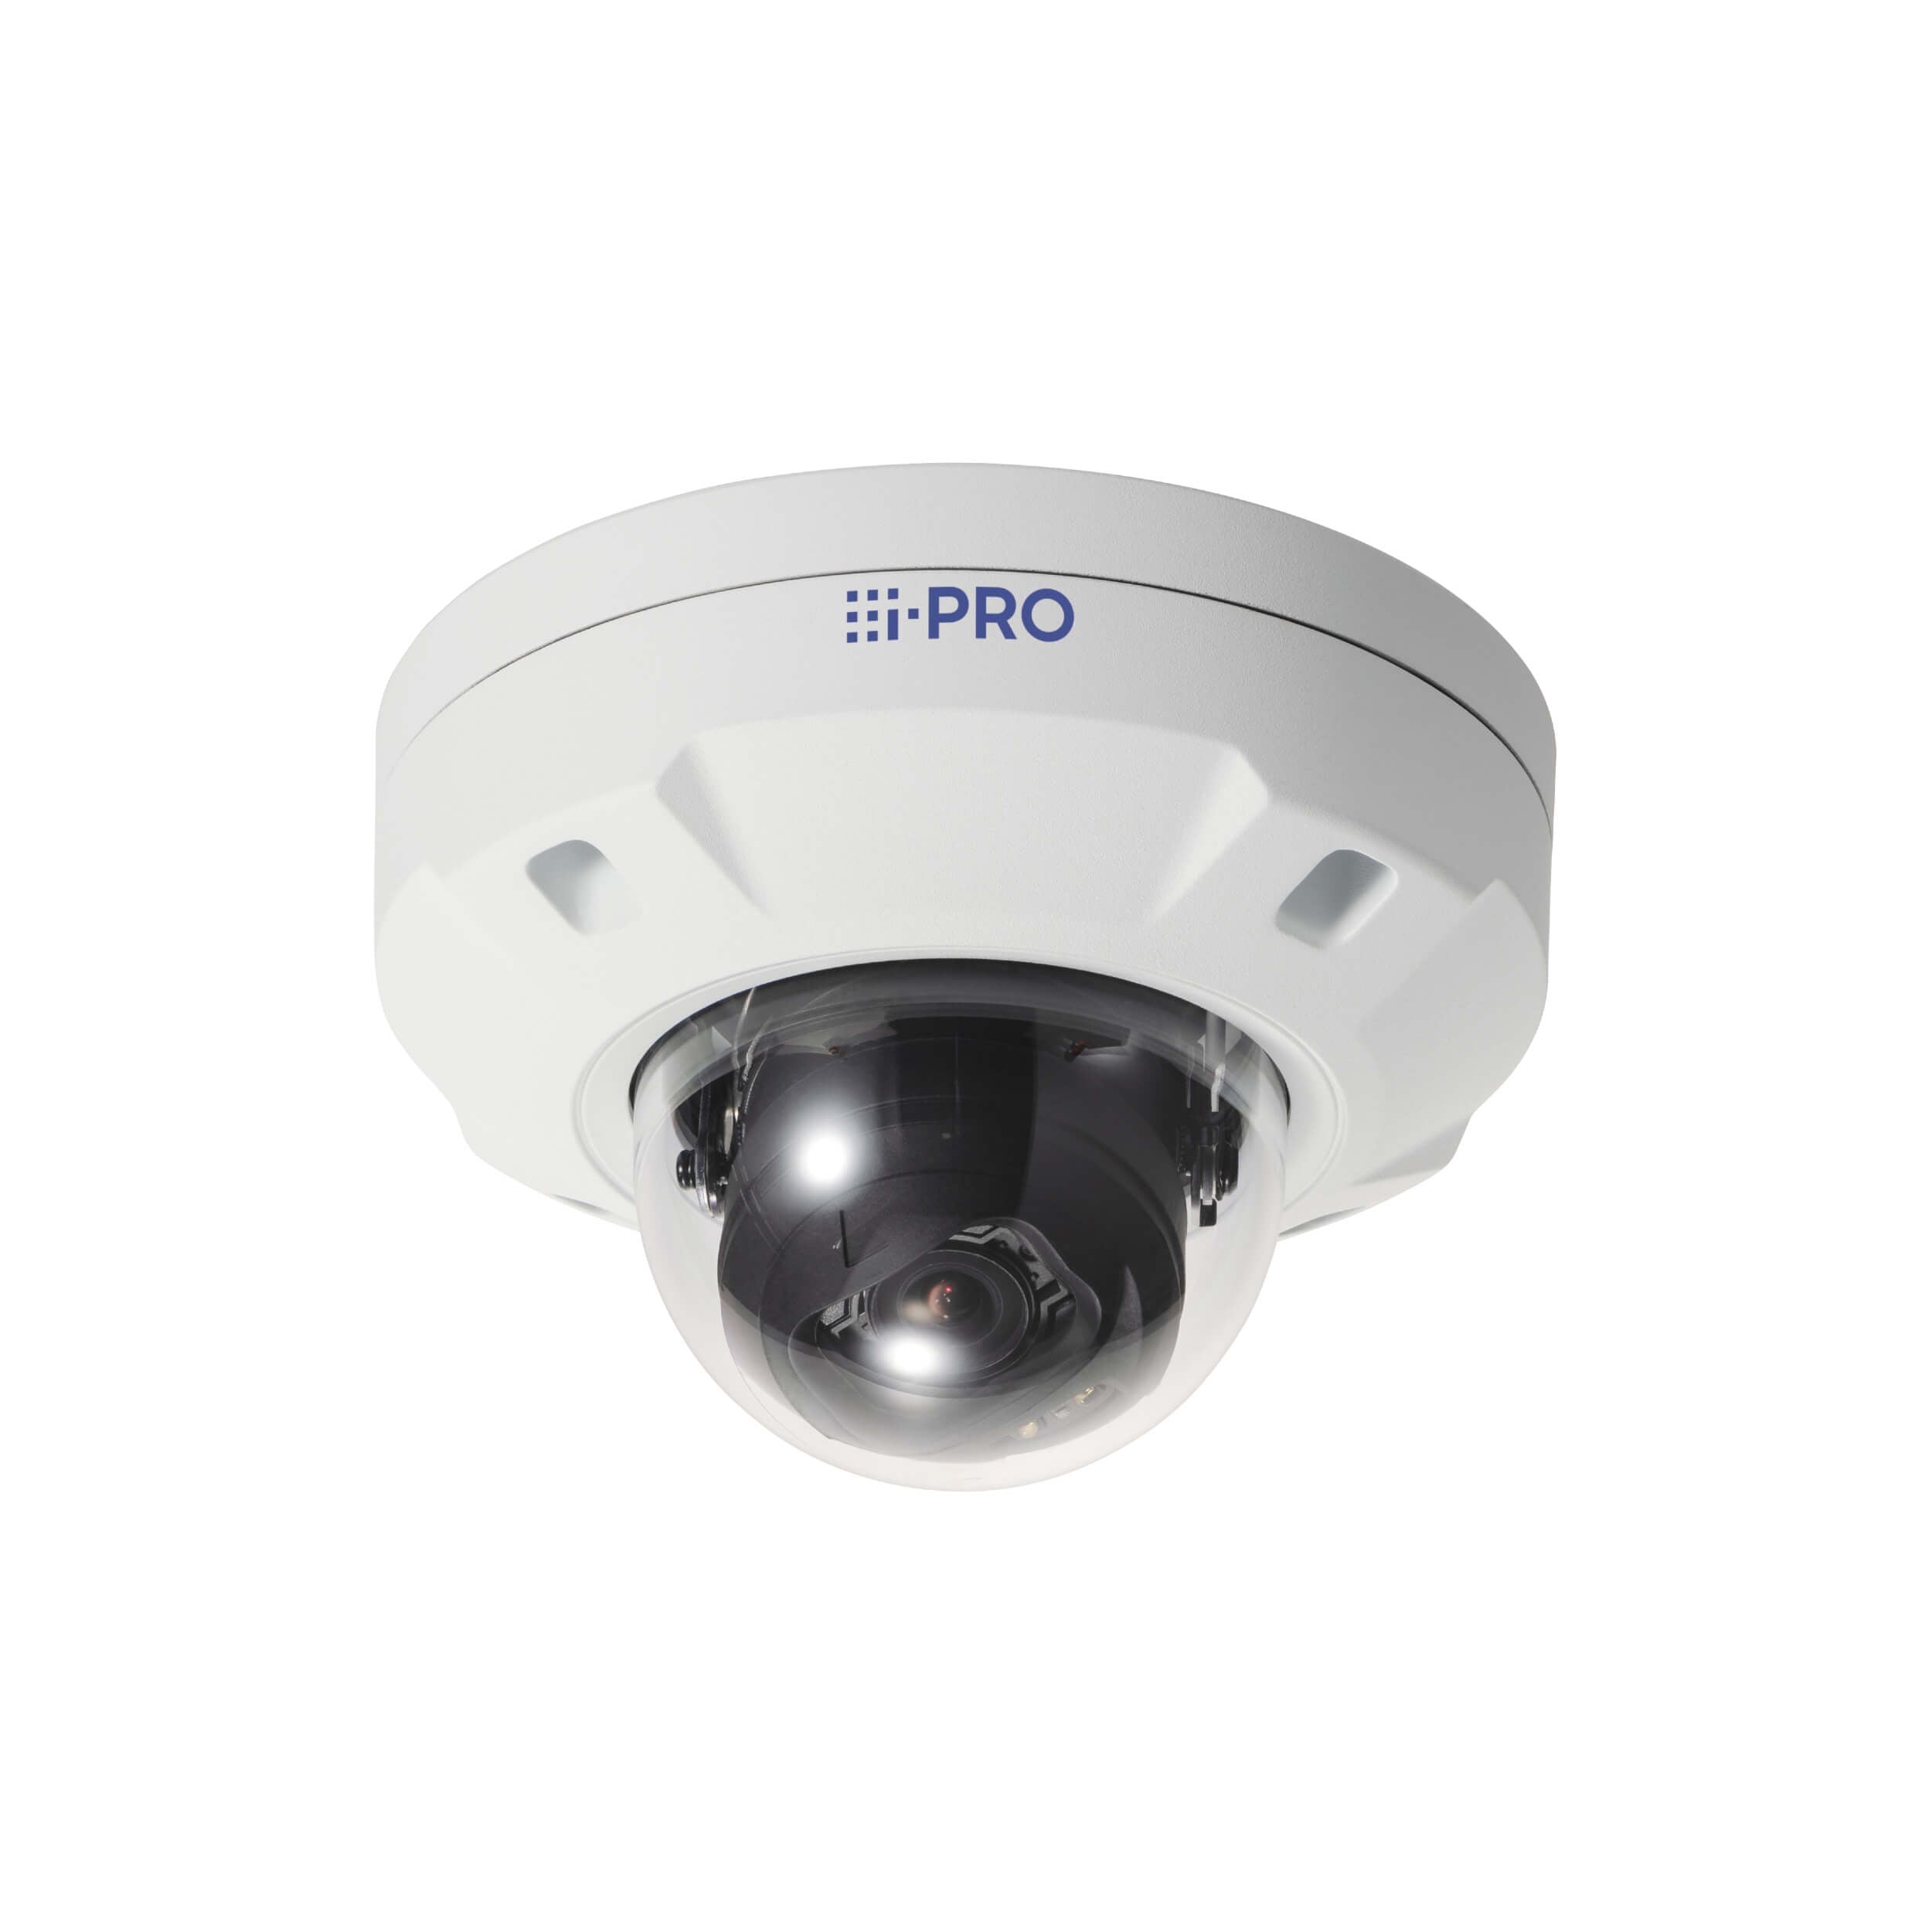 Panasonic WV-S25700-V2LN1 4K Vandal Resistant Outdoor Dome Network Camera with AI Engine with 4.3-8.6mm Lens